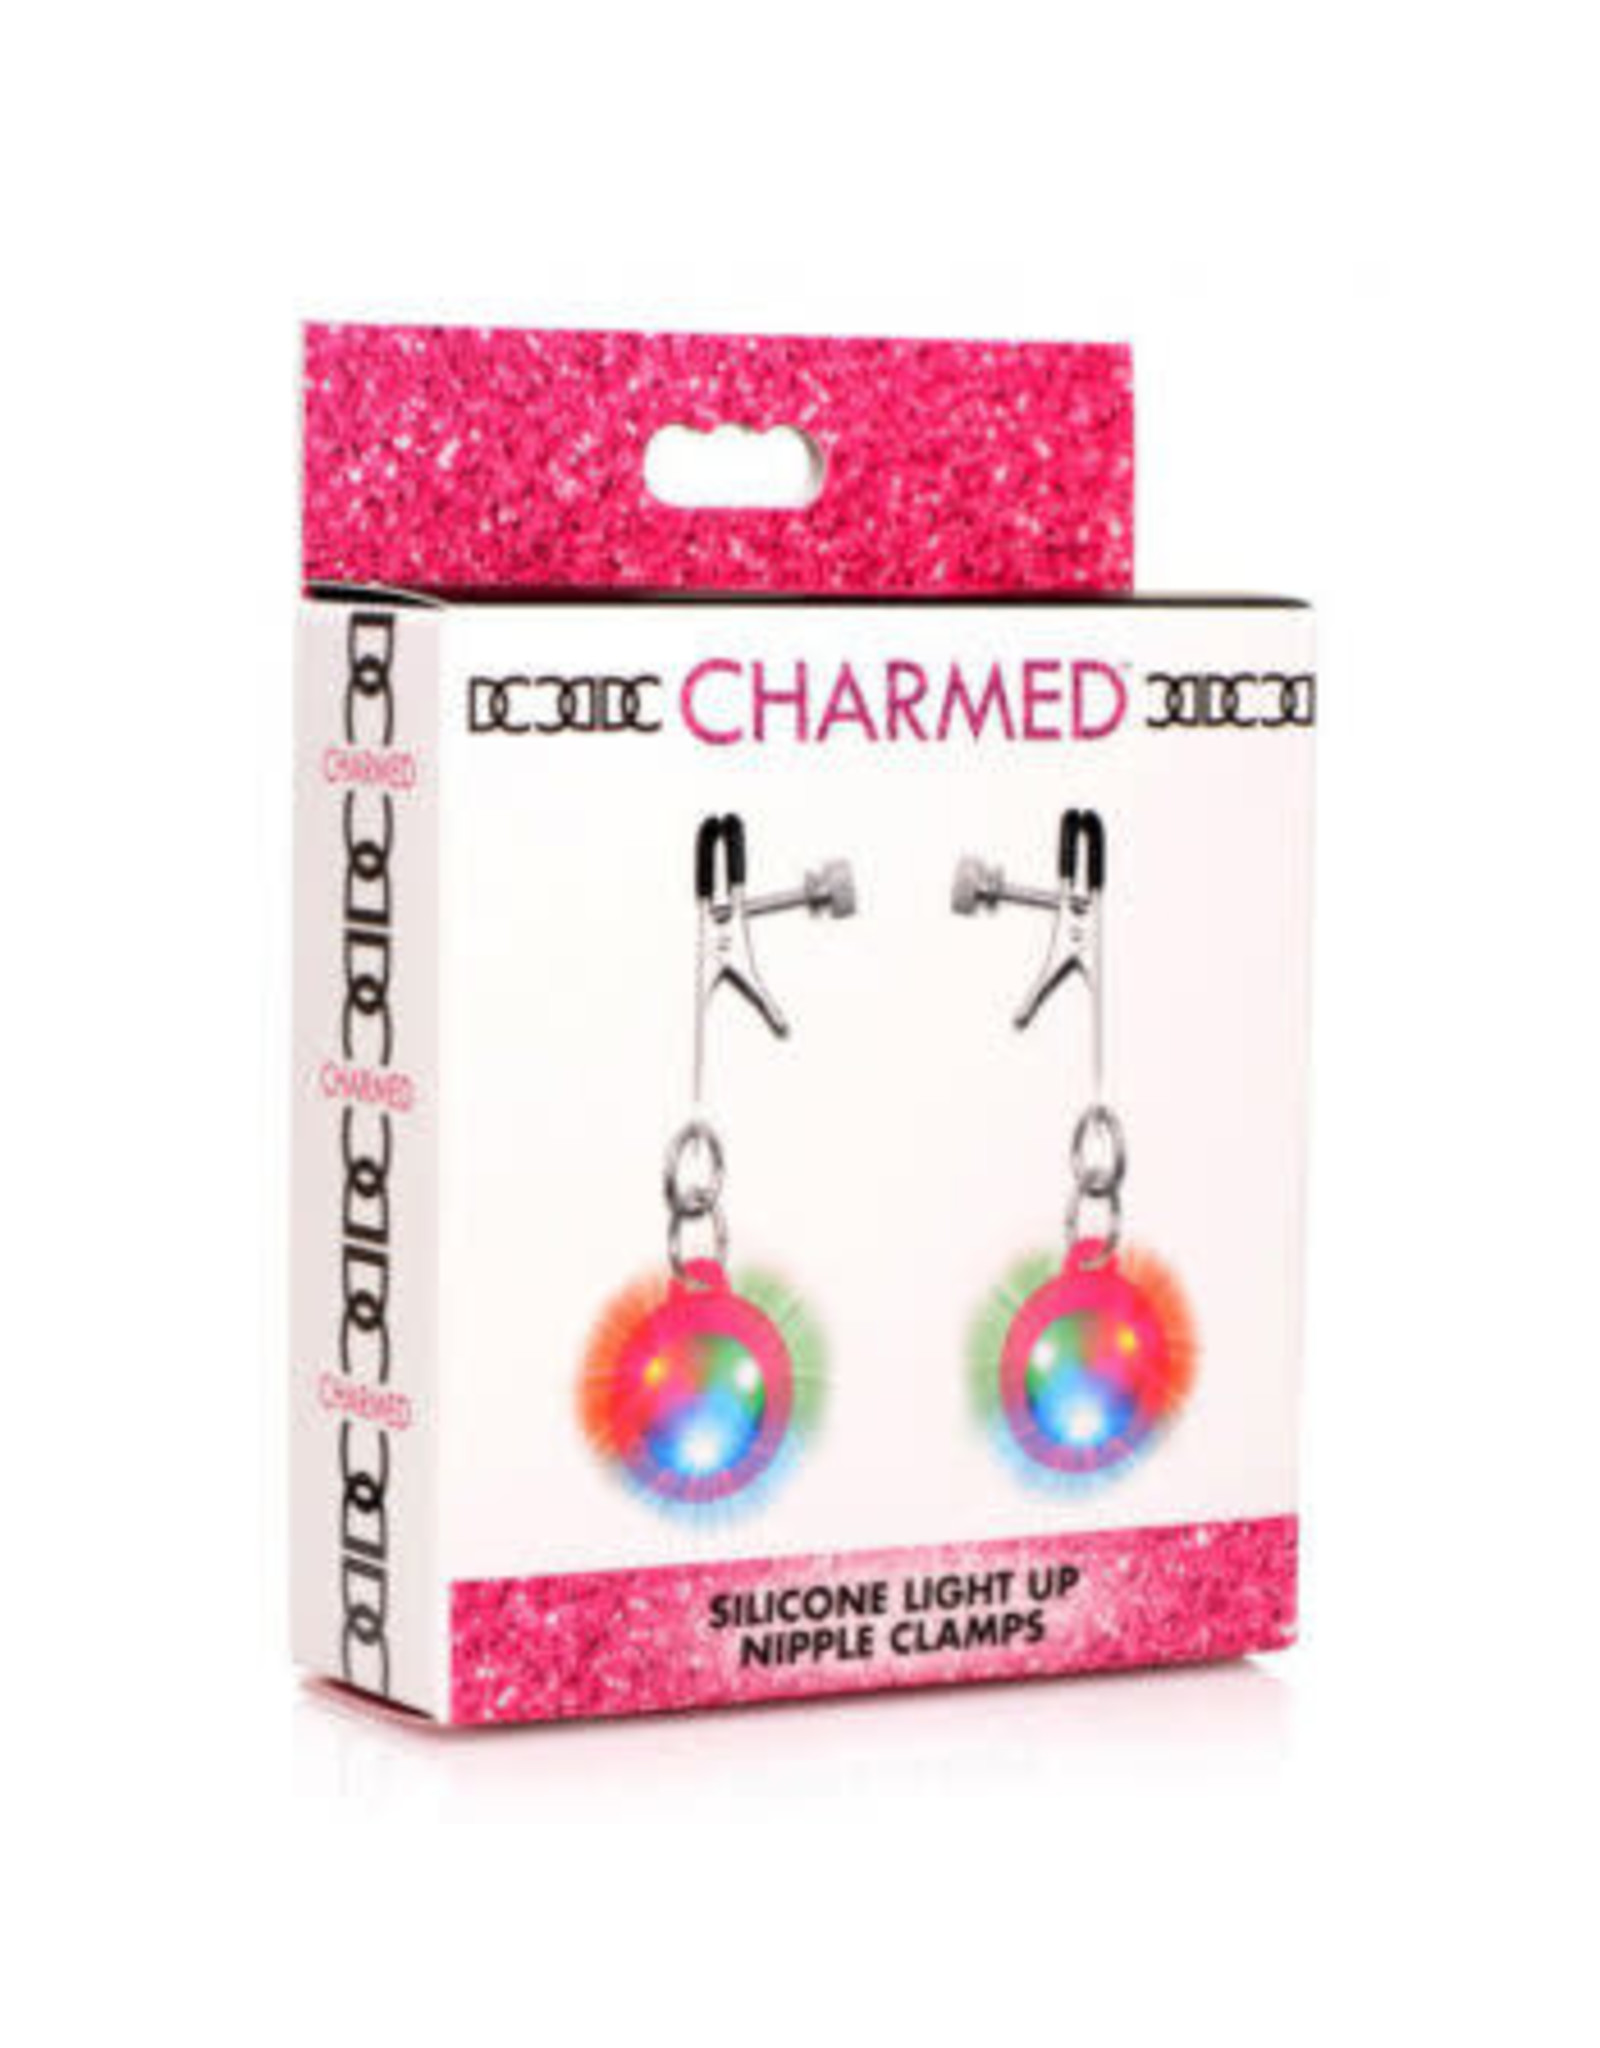 XR BRANDS CHARMED SILICONE LIGHT UP NIPPLE CLAMPS